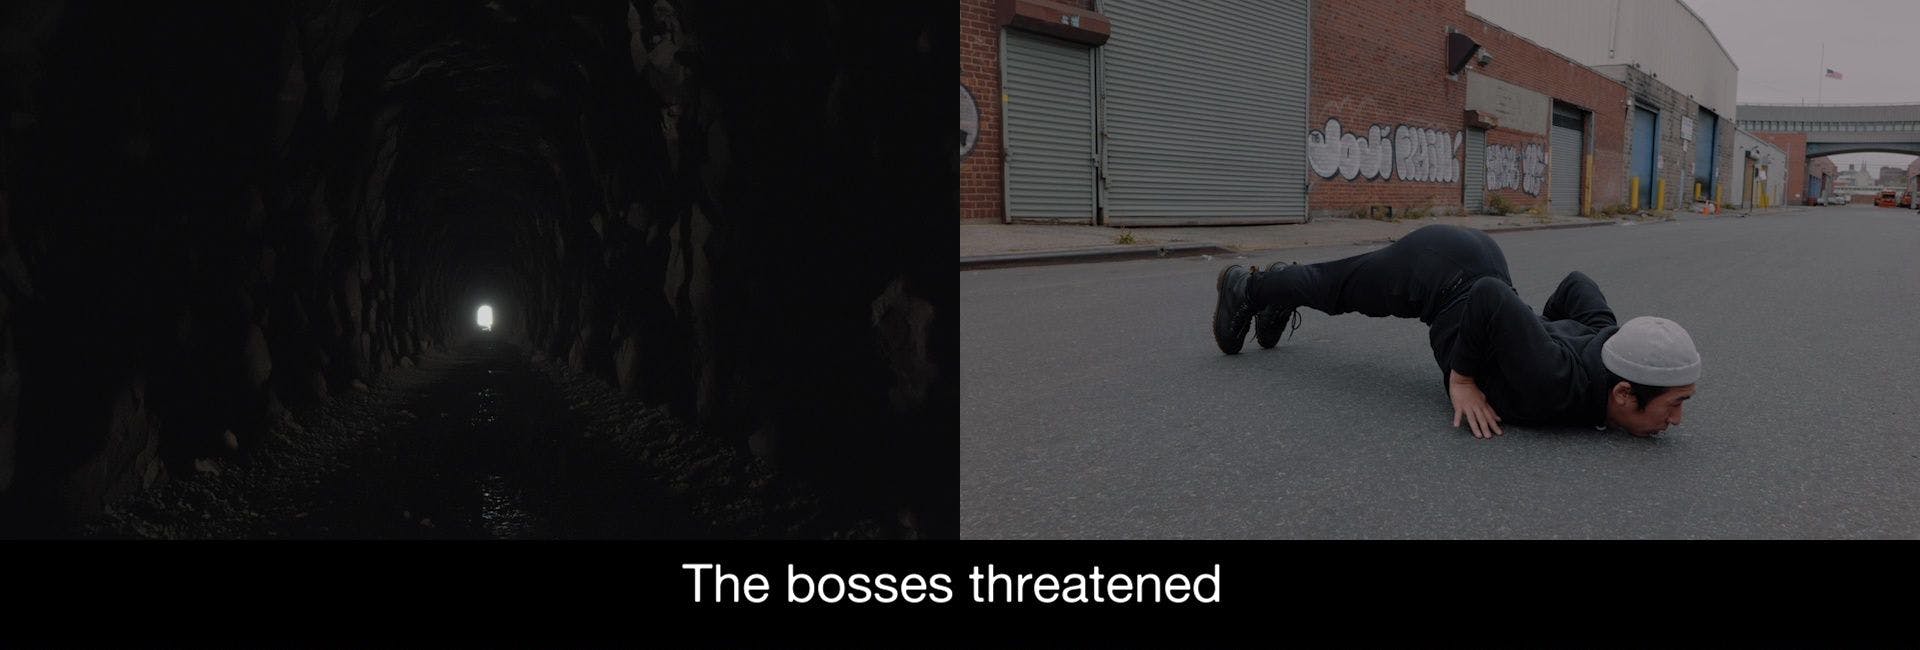 The left hand side of the image depicts a light at the end of a tunnel. The right hand side depicts an Asian man belly and face down in the street. They are wearing a white beannie hat. White text that says 'the bosses threatened' is visible along the bottom of the image.